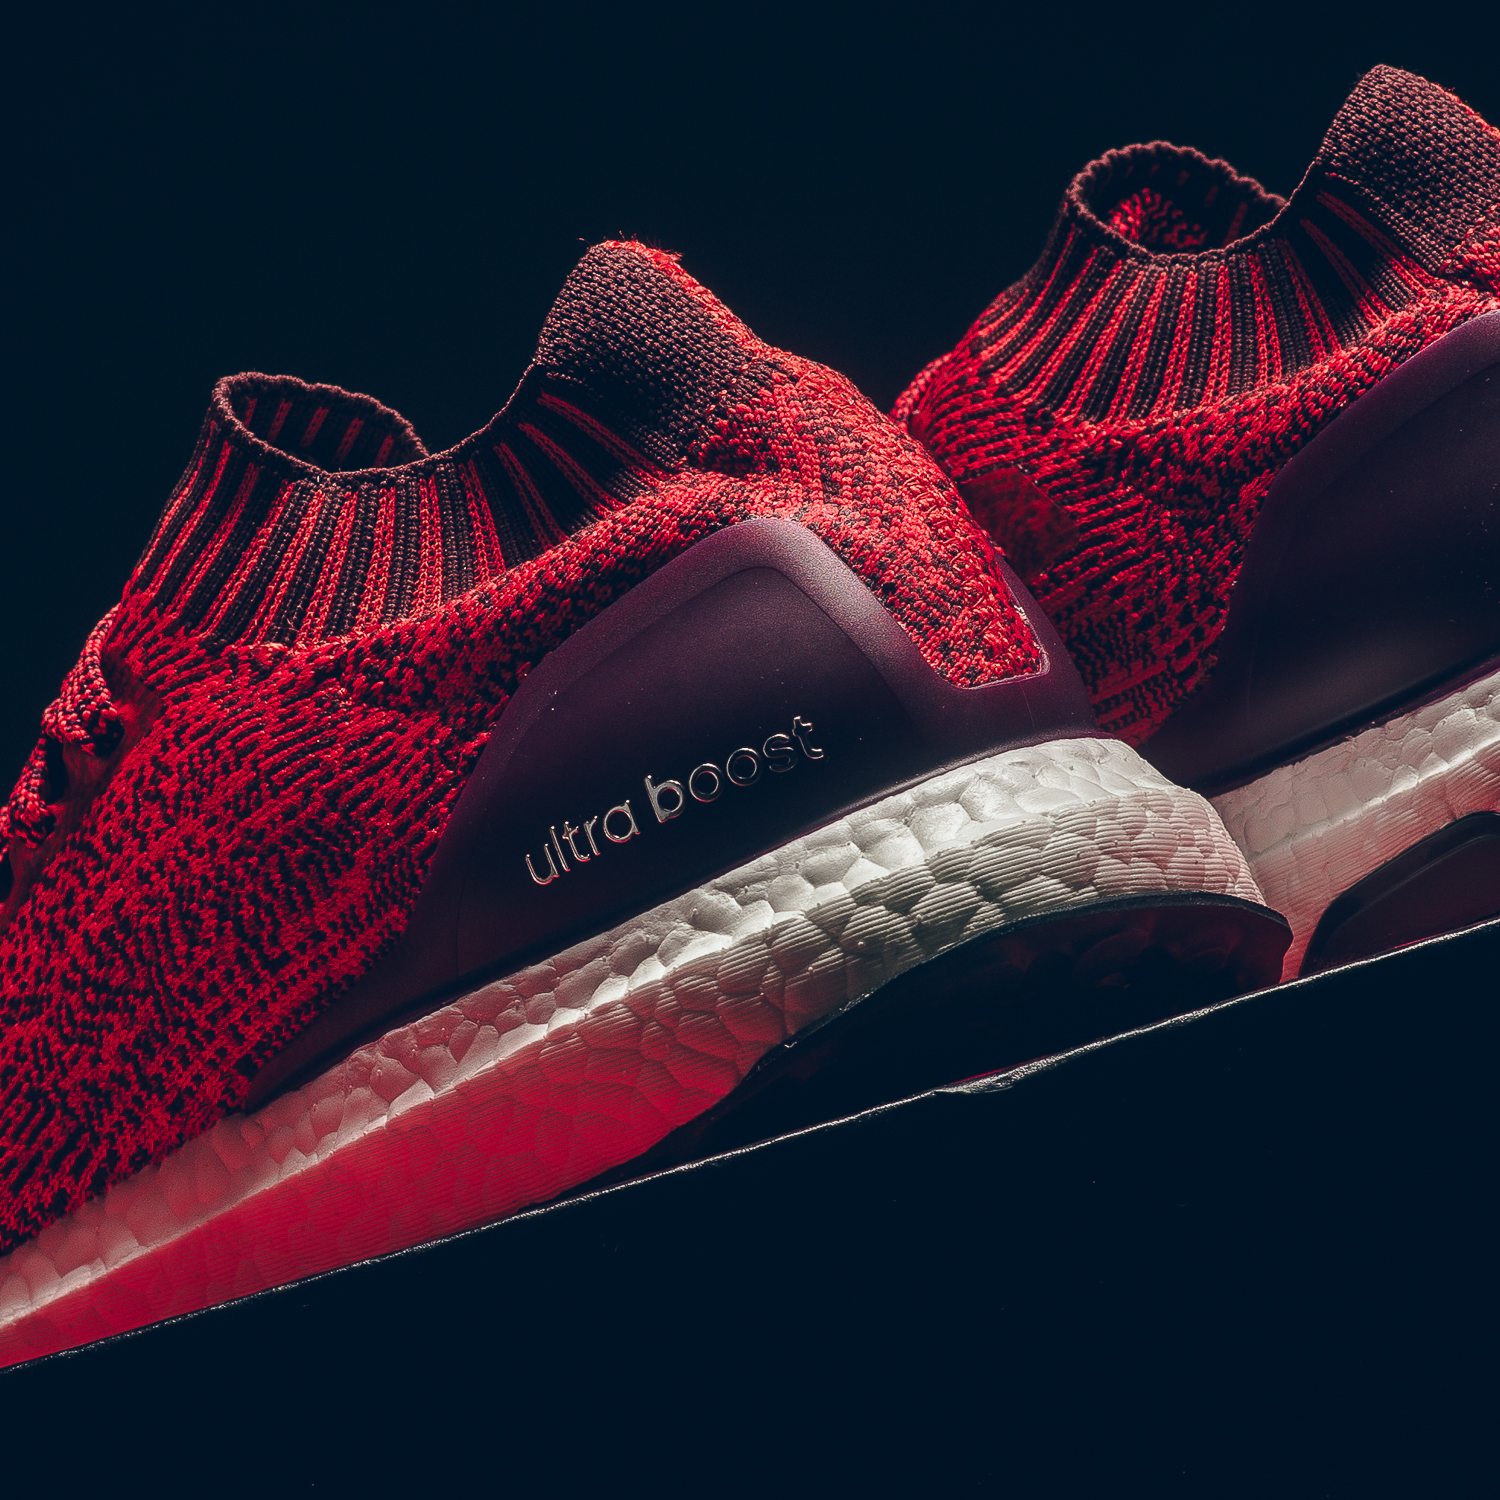 adidas Ultra Boost Uncaged "Tactile Red"